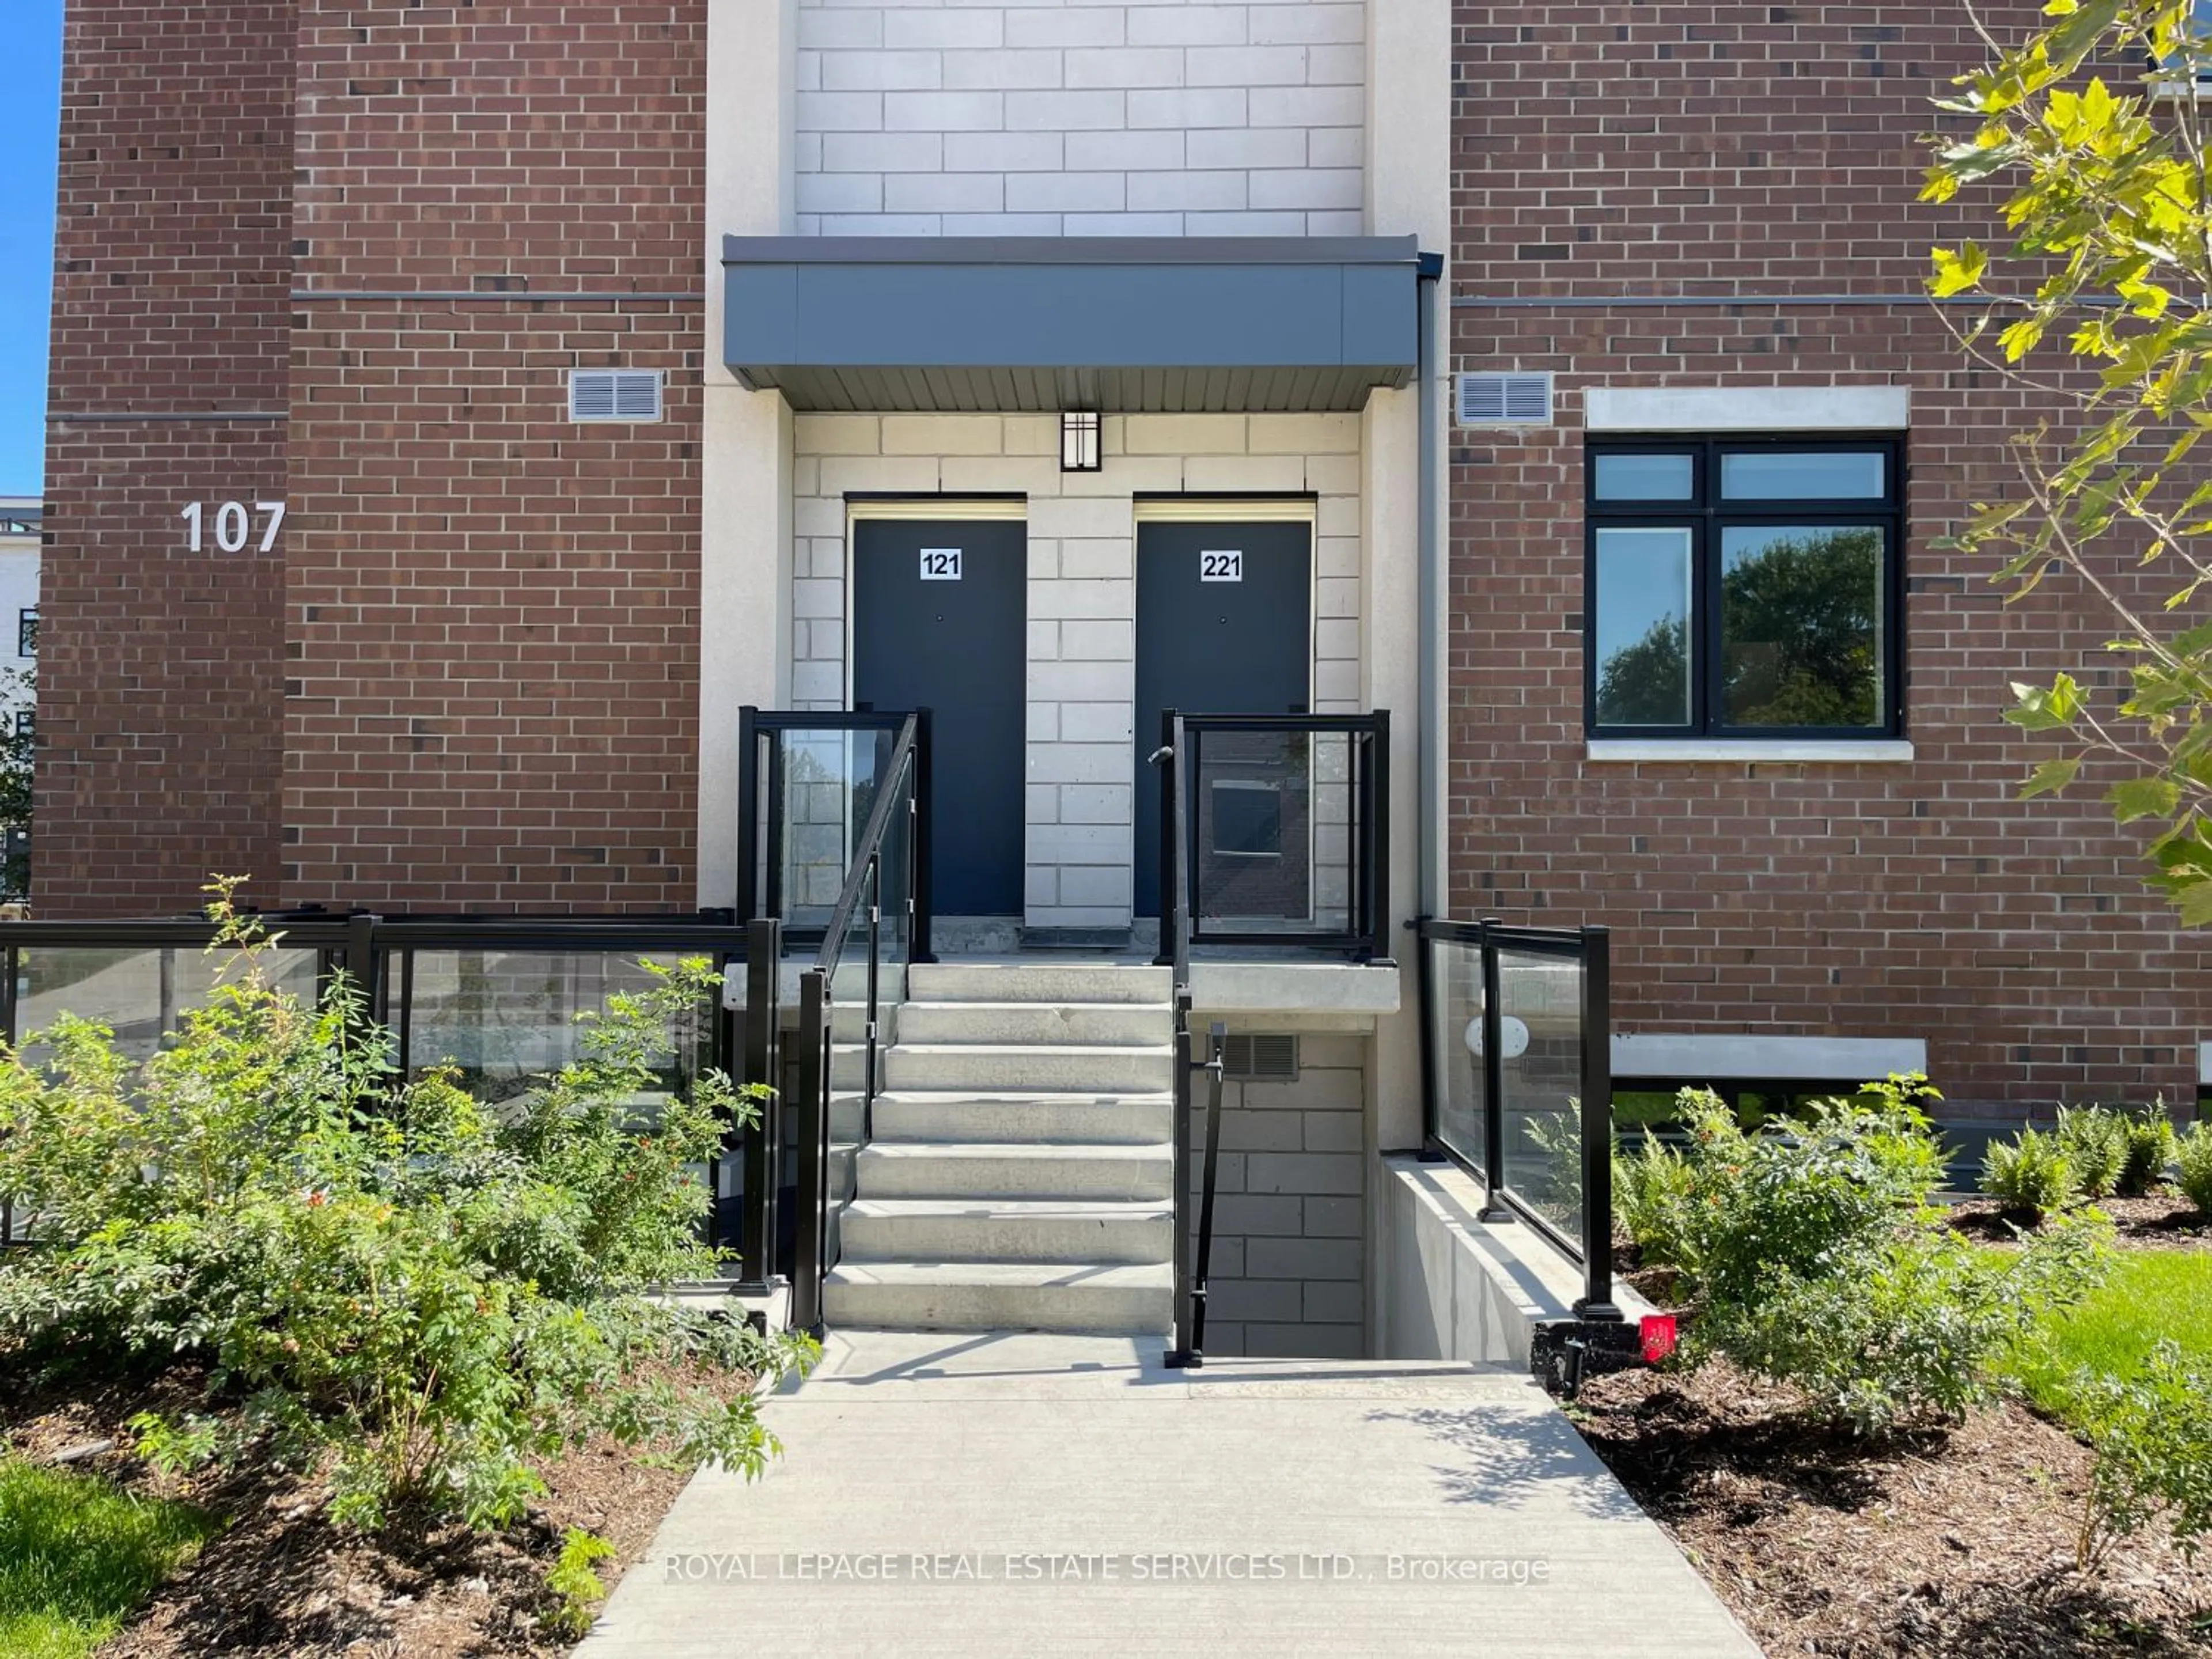 Home with brick exterior material for 1070 Douglas Mccurdy Cmn #221, Mississauga Ontario L5G 0C6